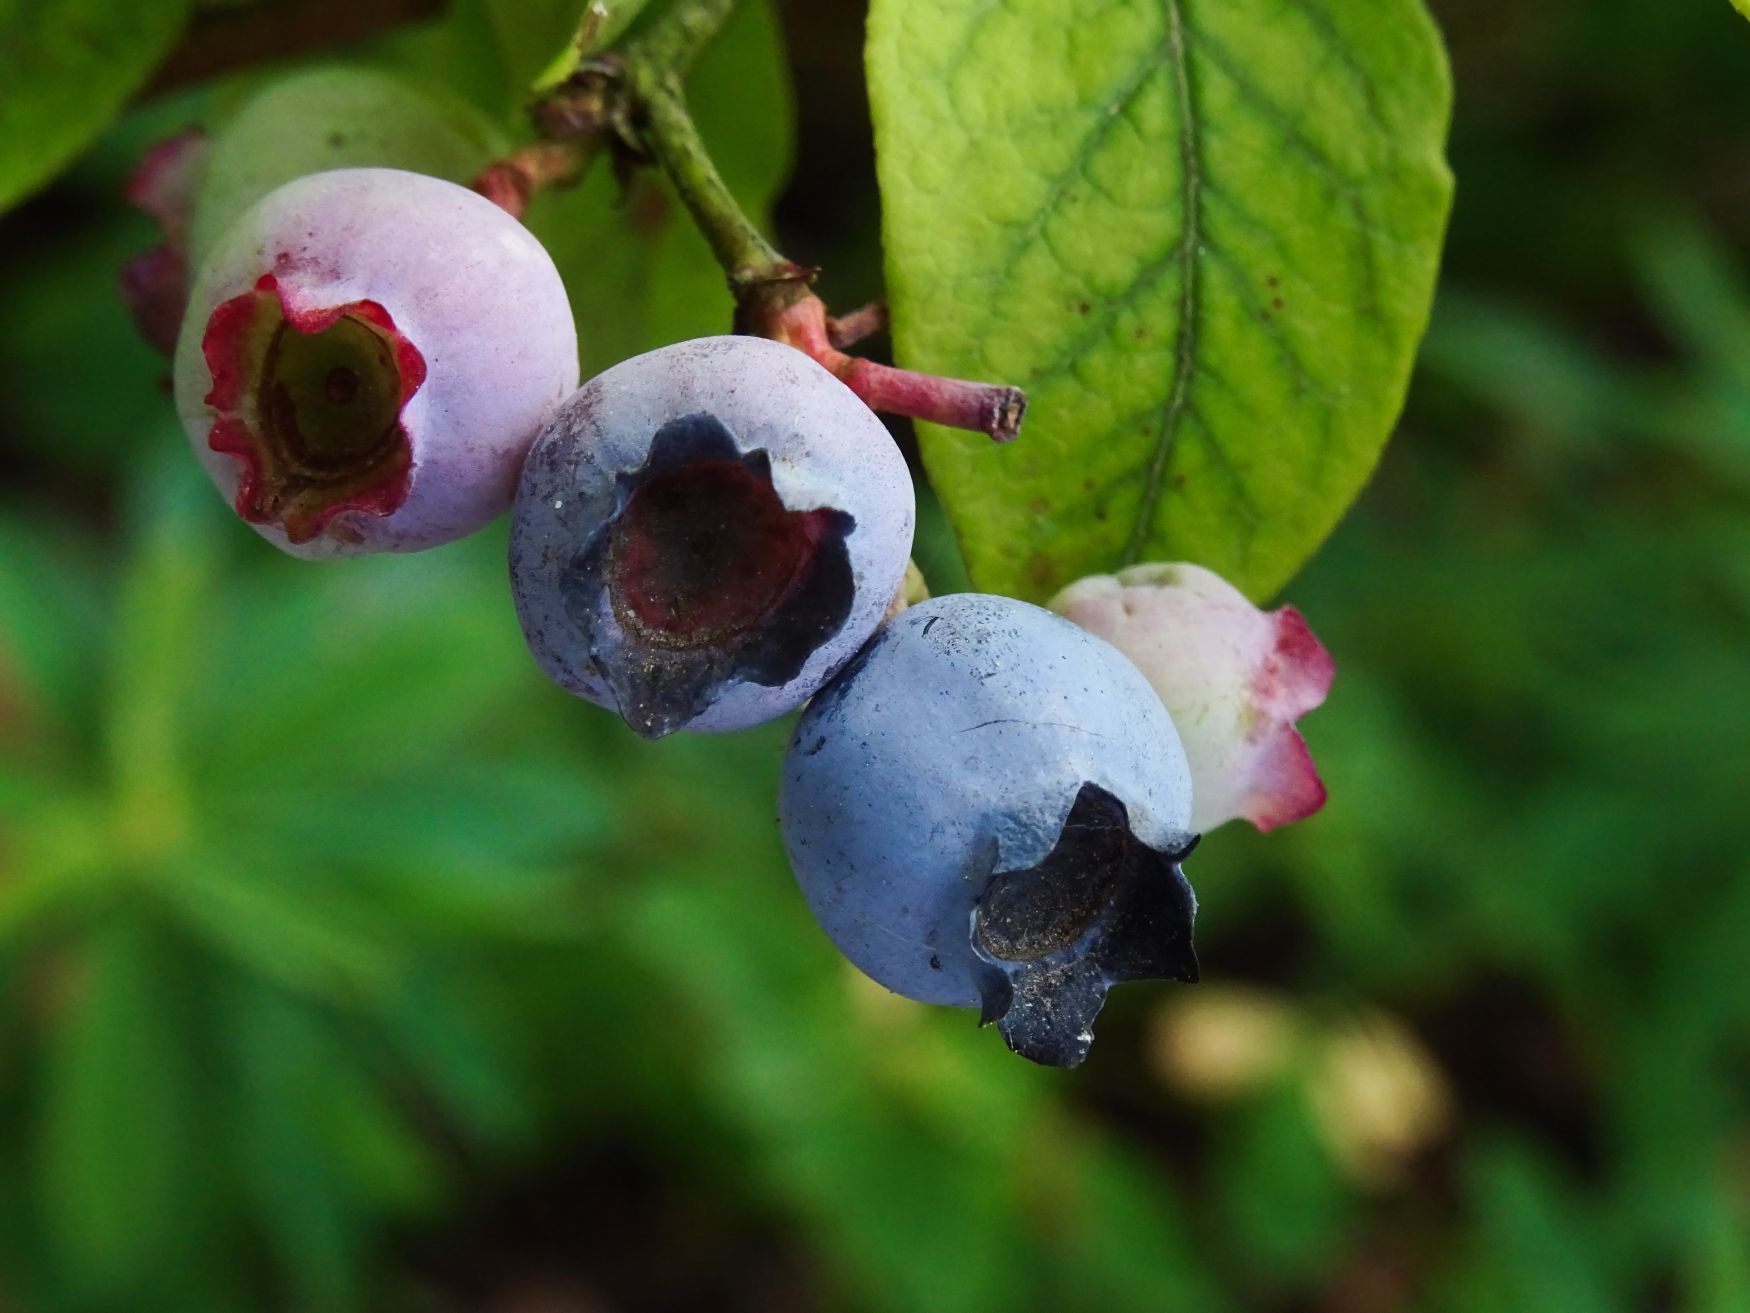 A close-up of ripening bilberries.